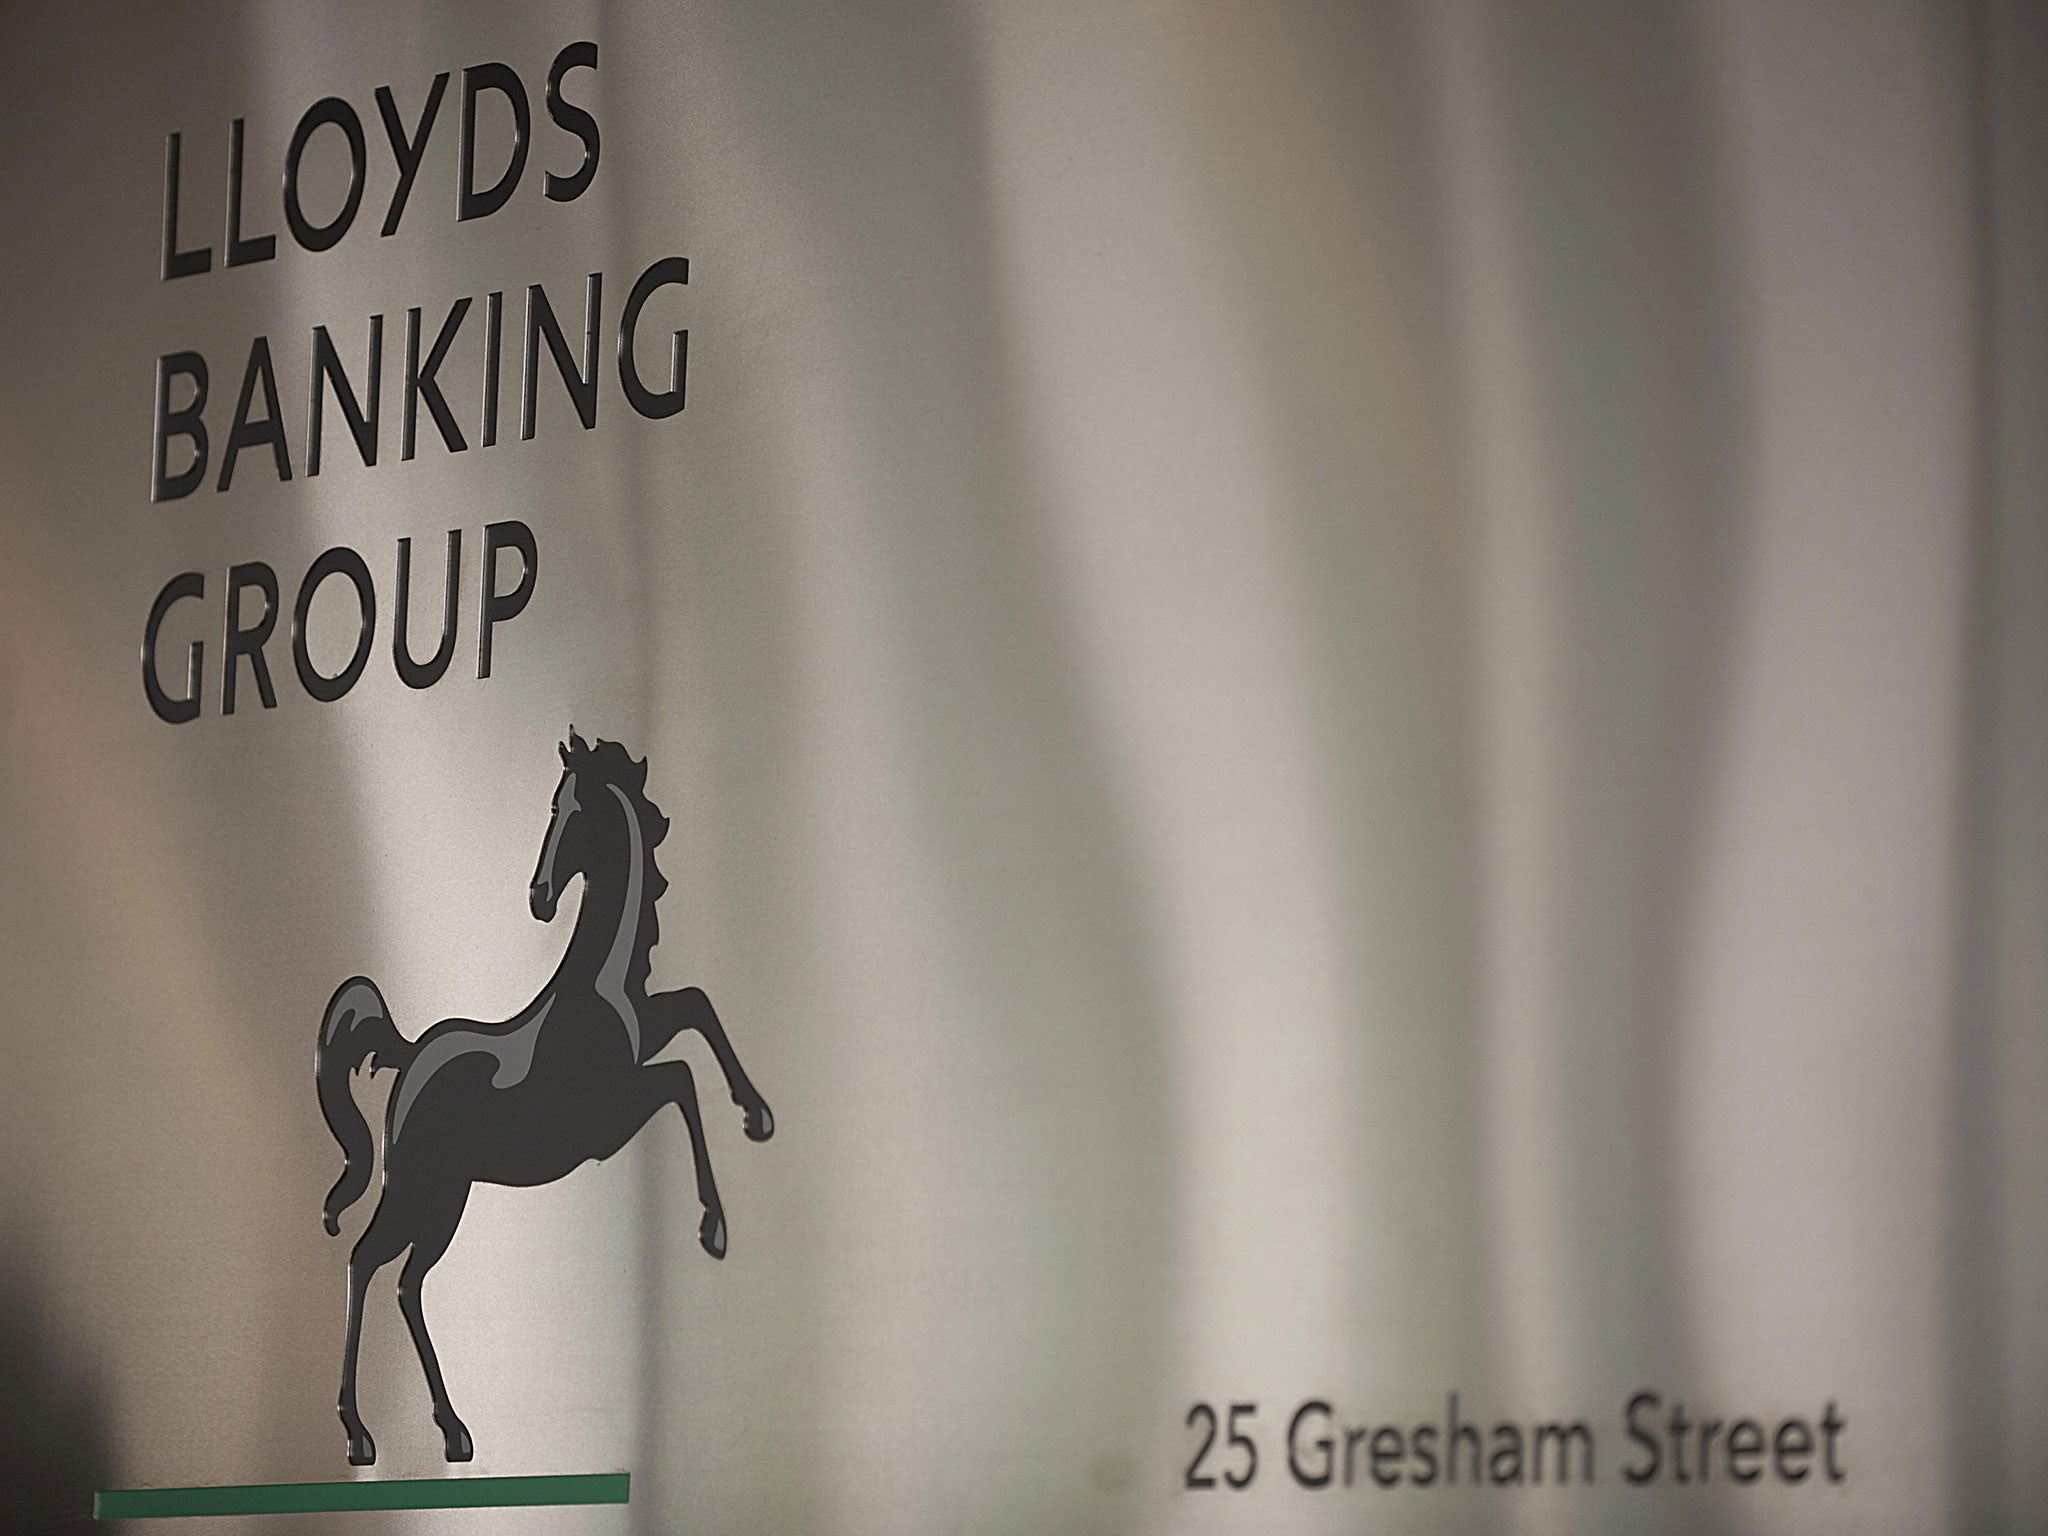 Lloyds and eight other major banks, including RBS and Barclays, have already set aside £3bn to cover mis-selling to clients